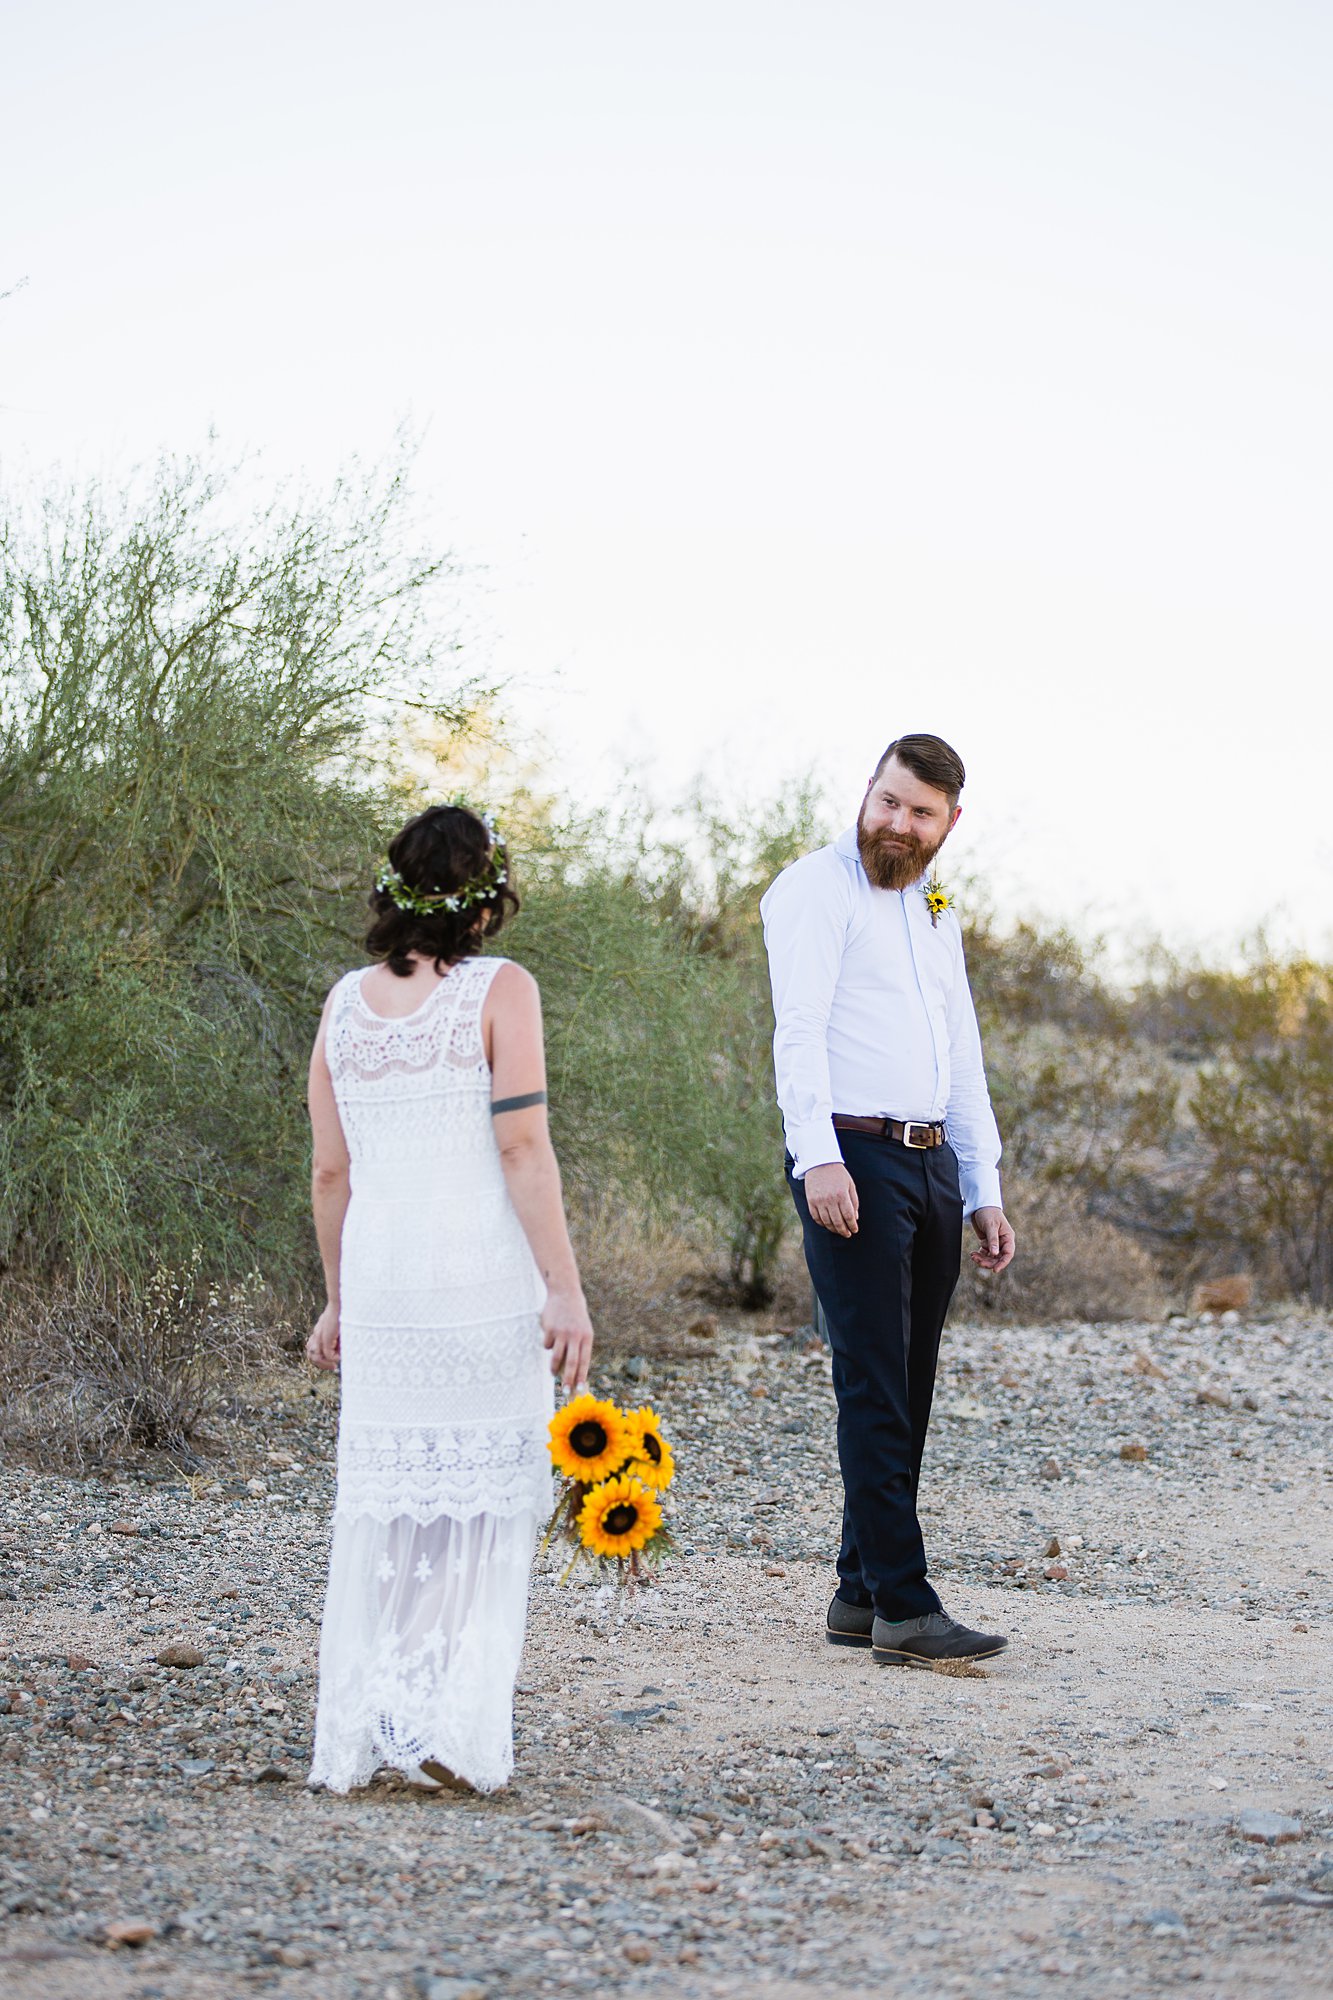 Boho bride and groom during their wedding first look in the Arizona desert by Phoenix wedding photographers PMA Photography.